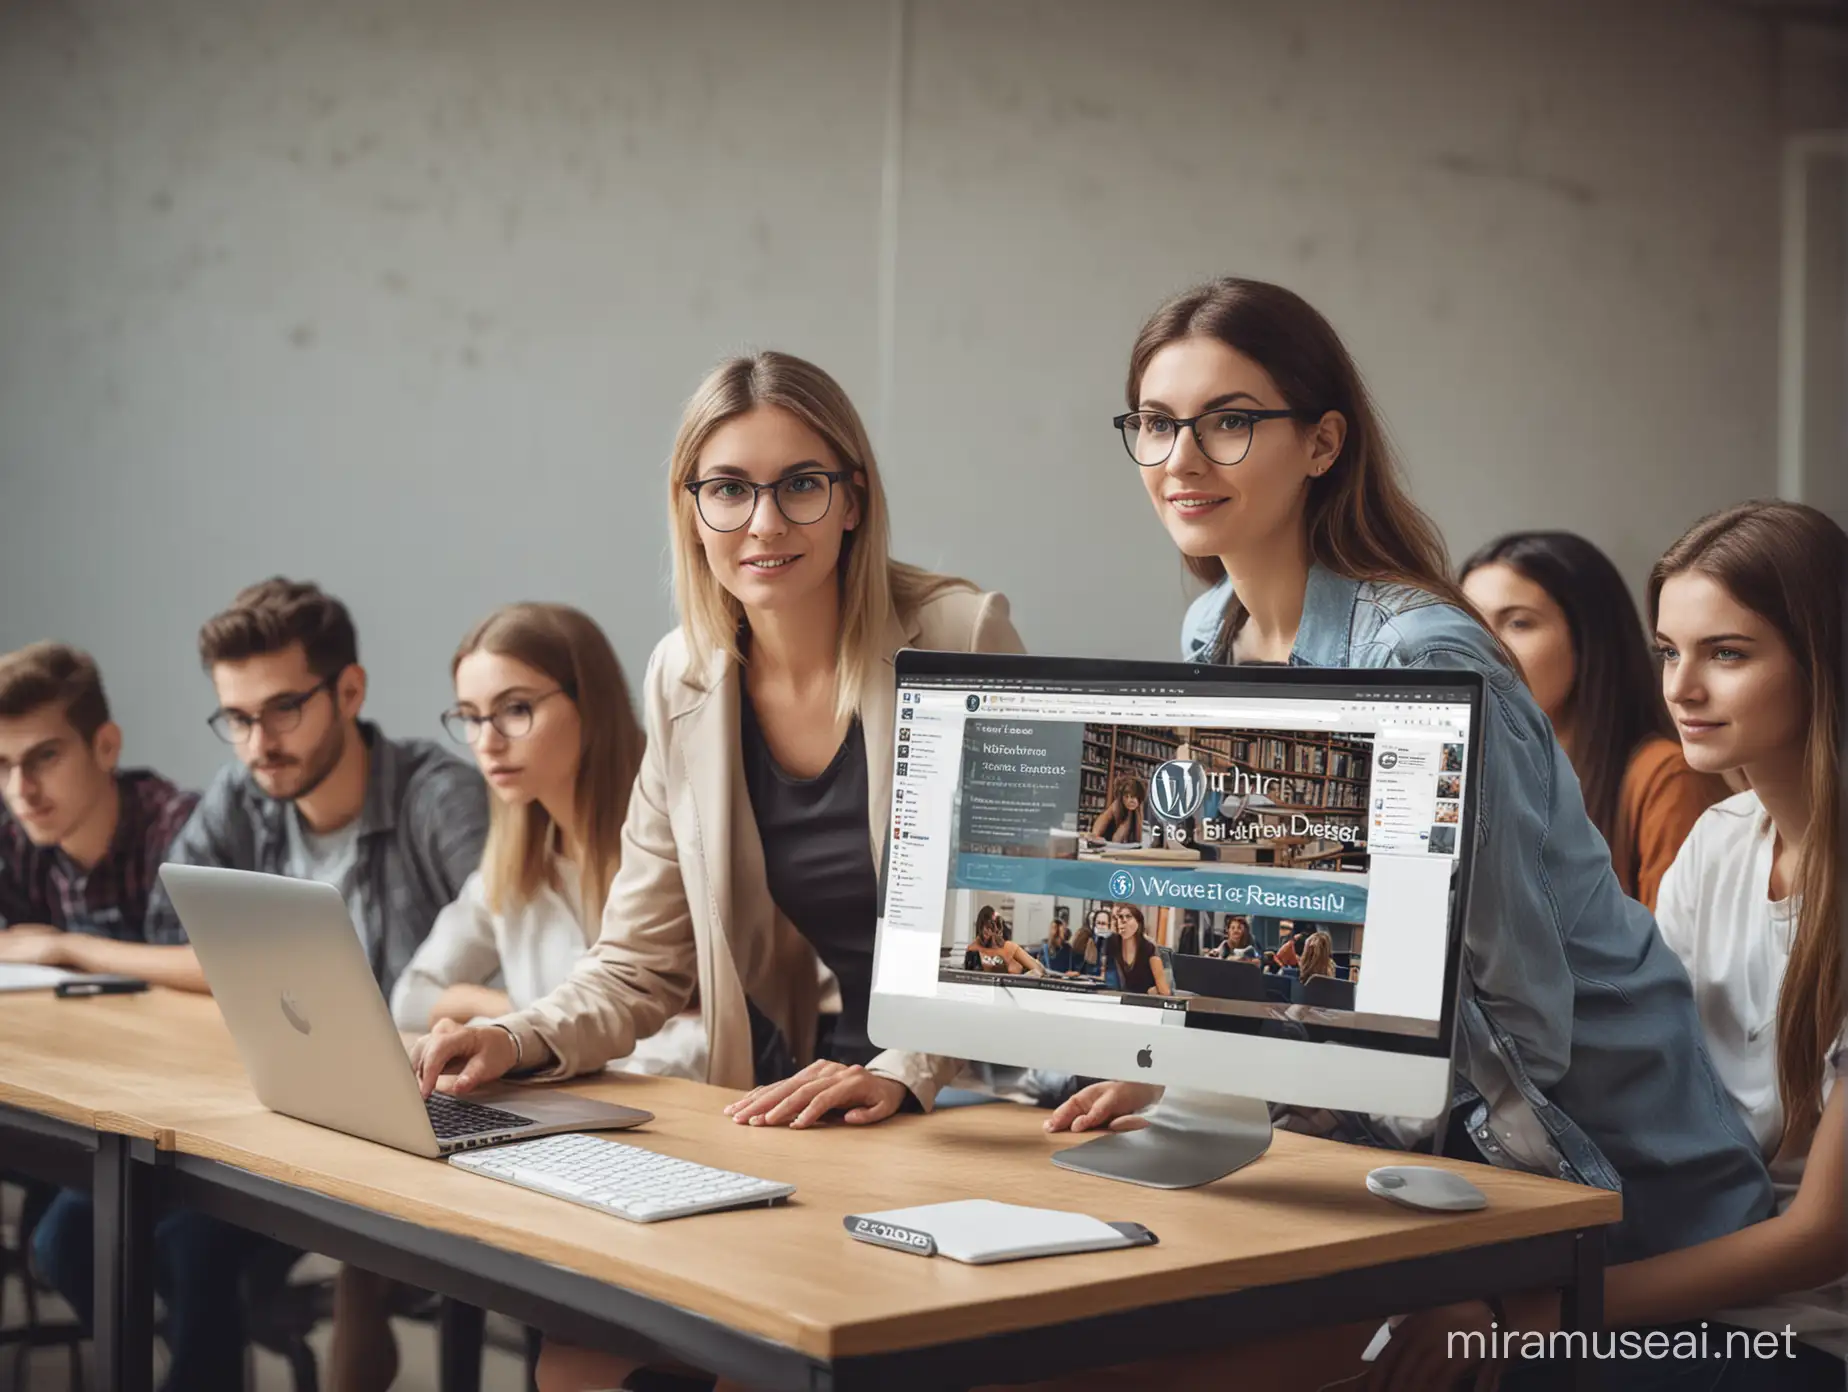 A female professor in an attractive educational environment with a big computer who is teaching website design with WordPress CMS and the WordPress logo is also in the photo and some students who are learning and looking at the professor.